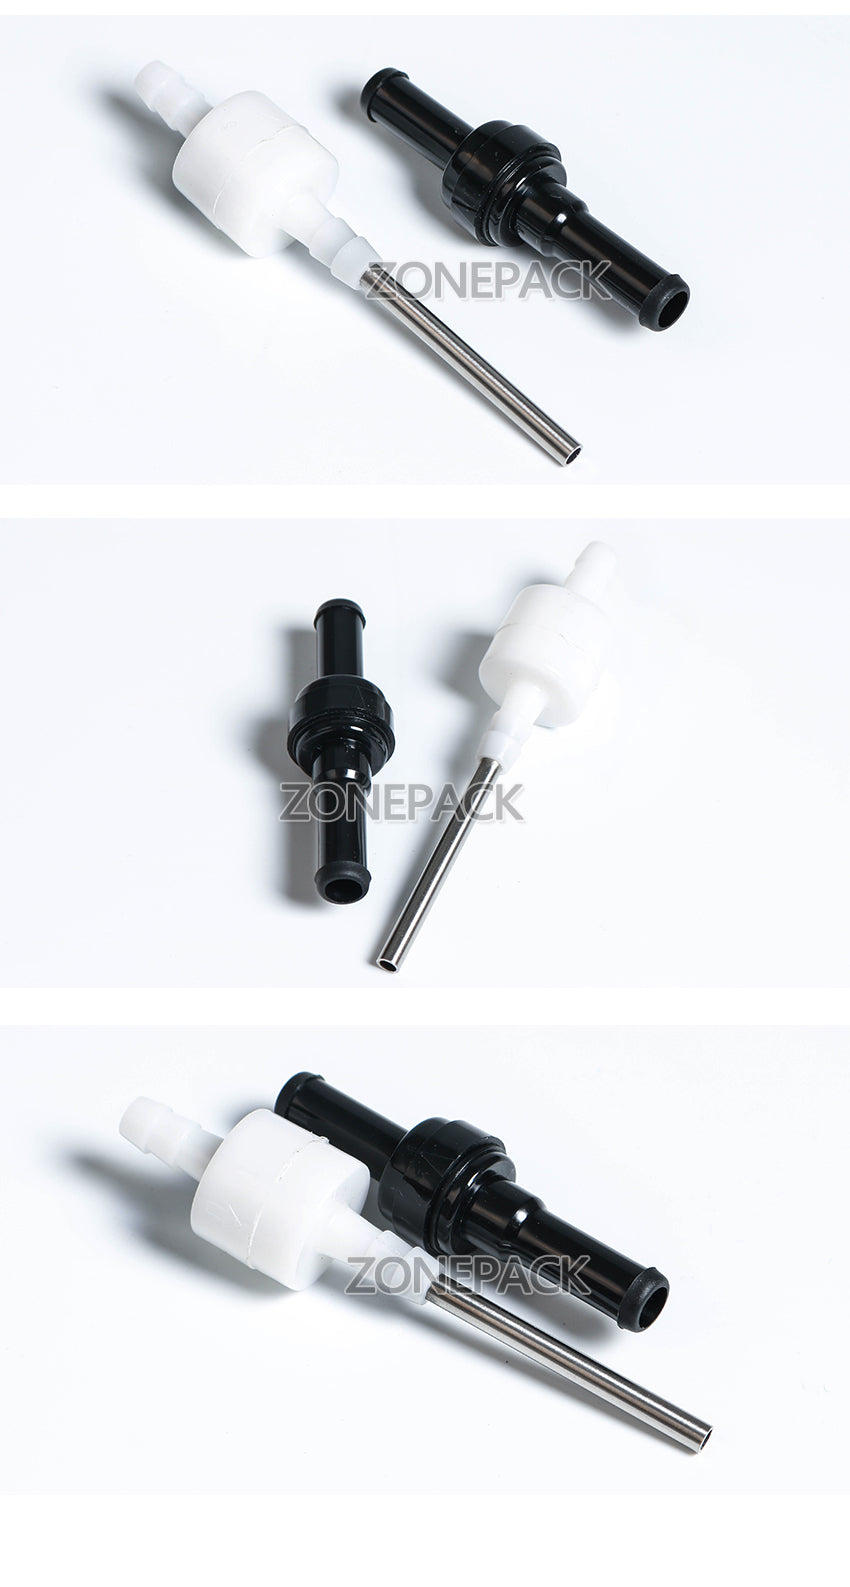 ZONEPACK GFK-160 Small Size Filling Machine Nozzles for Digital Filling Machine